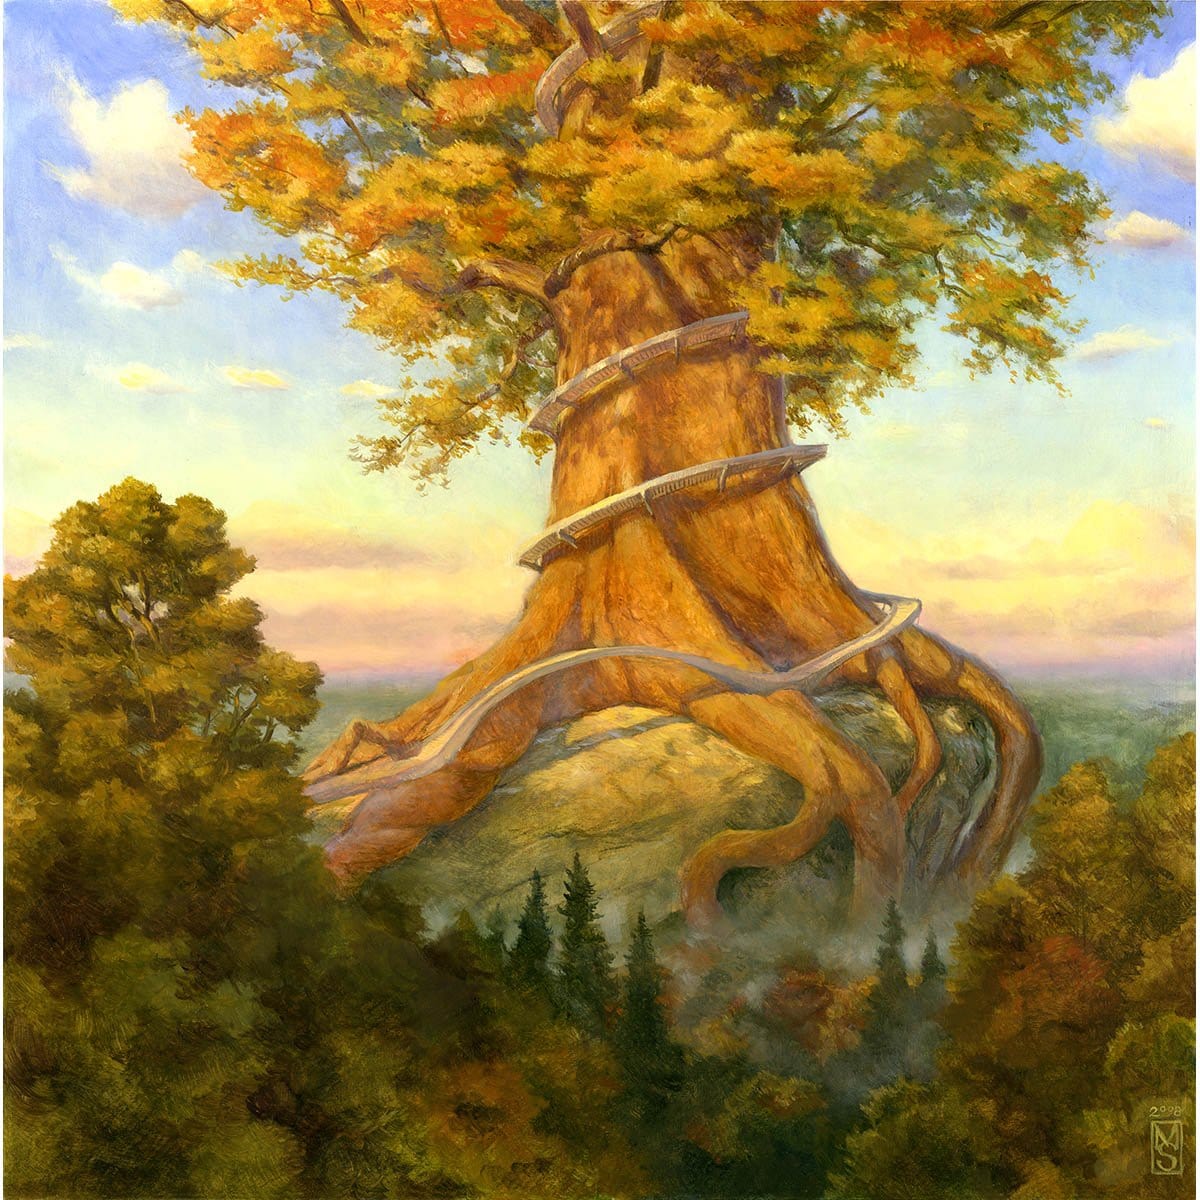 Rootbound Crag Print - Print - Original Magic Art - Accessories for Magic the Gathering and other card games